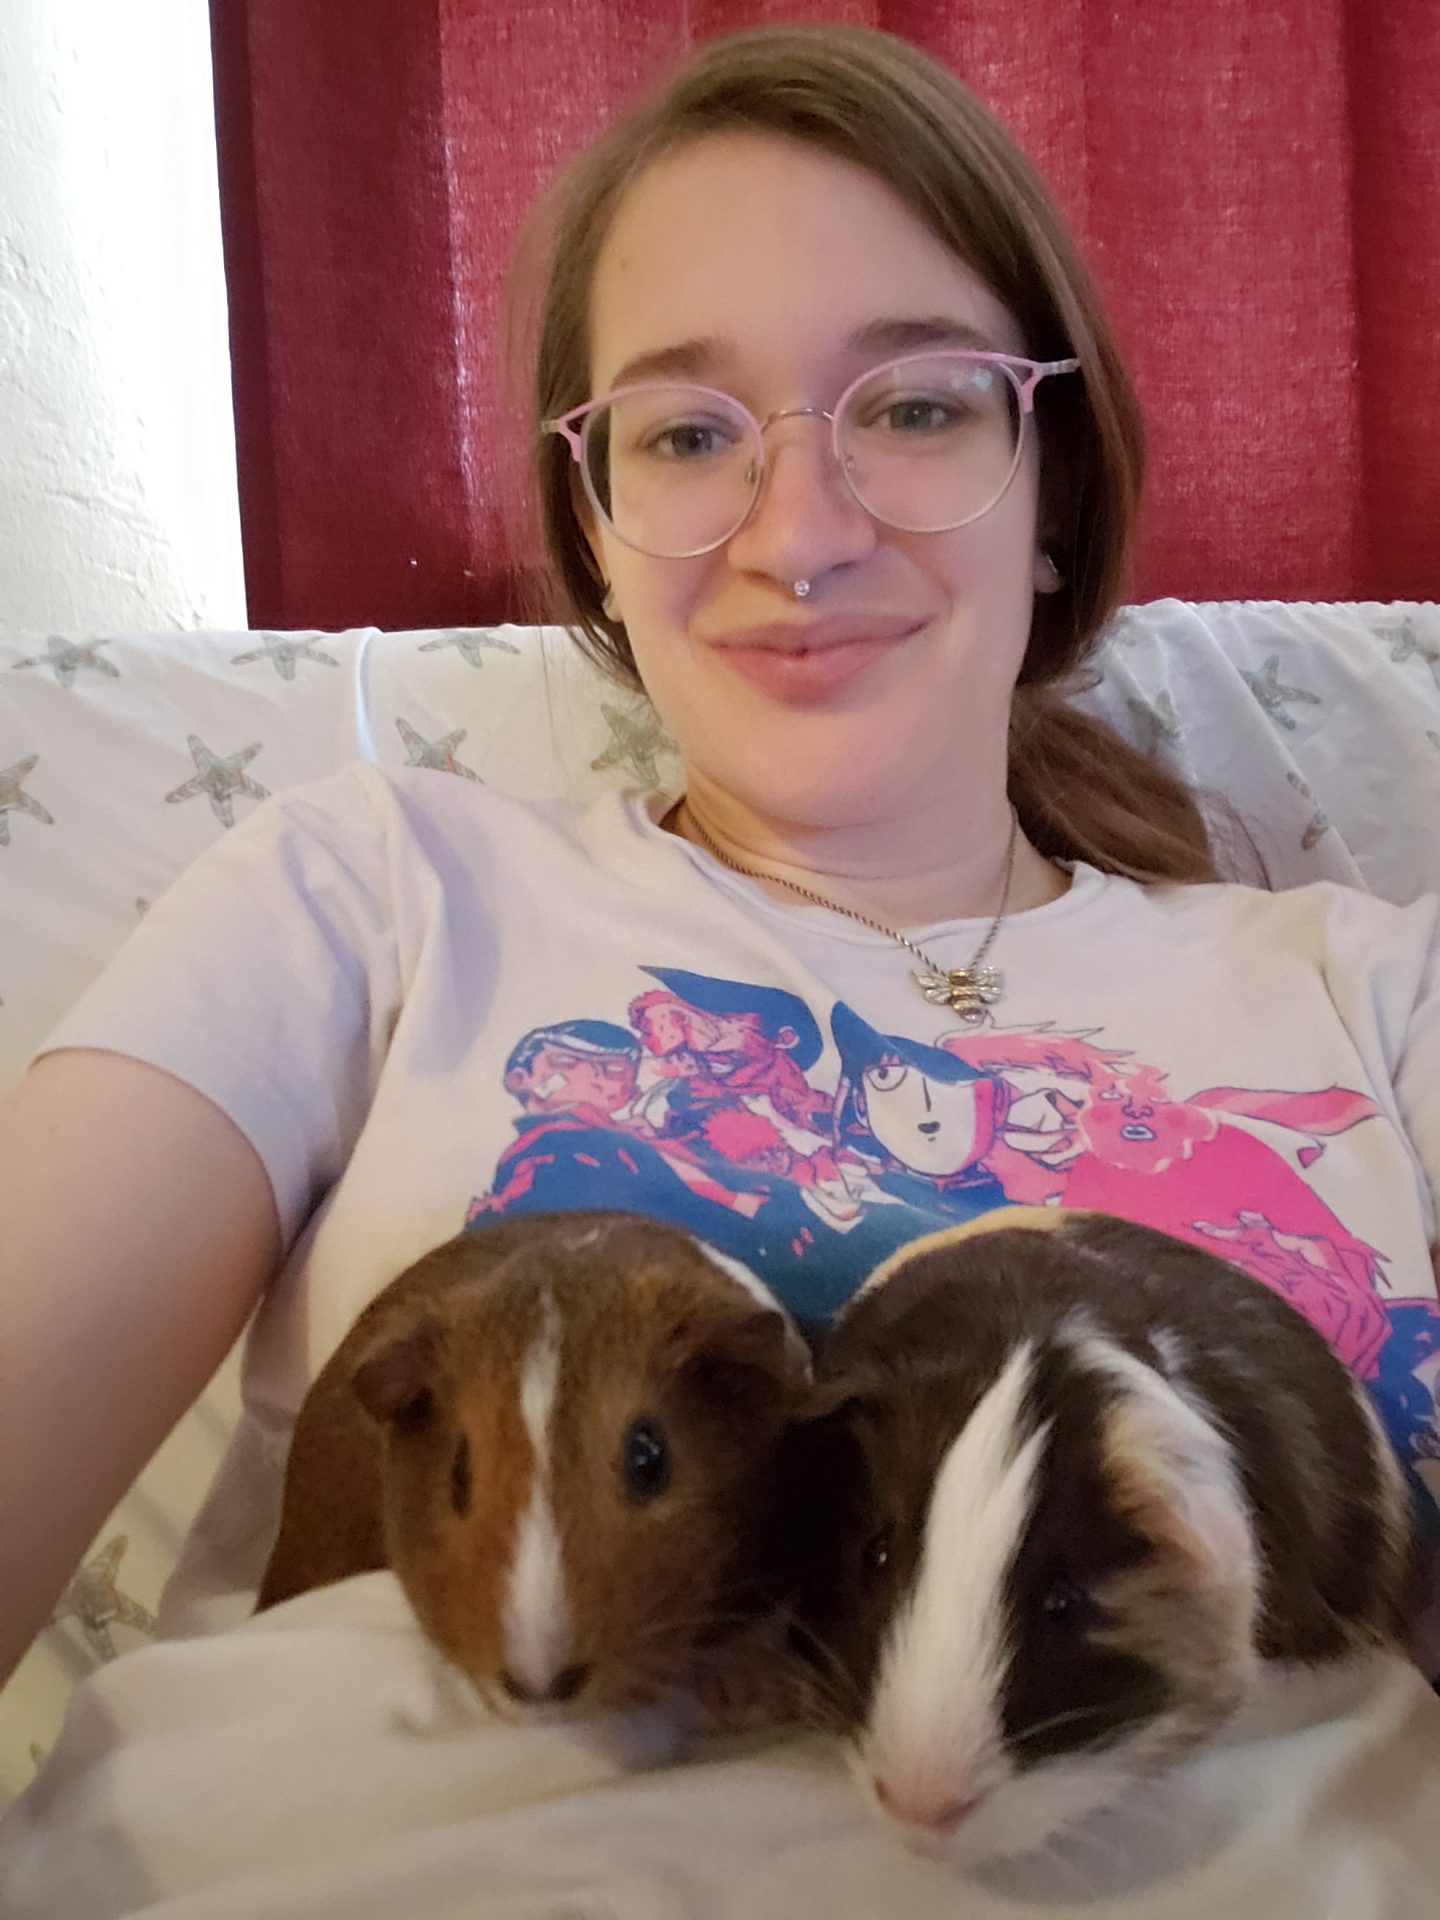 Passed another chemistry course Dad! Here are the pigs you said I earned for passing the last course in the hospital. Shame you never got to meet them, they're two girls named Sugar and Pepper. You would have played indifferent but I know you would of loved them! I still can't accept that you're gone, I love you Dad.